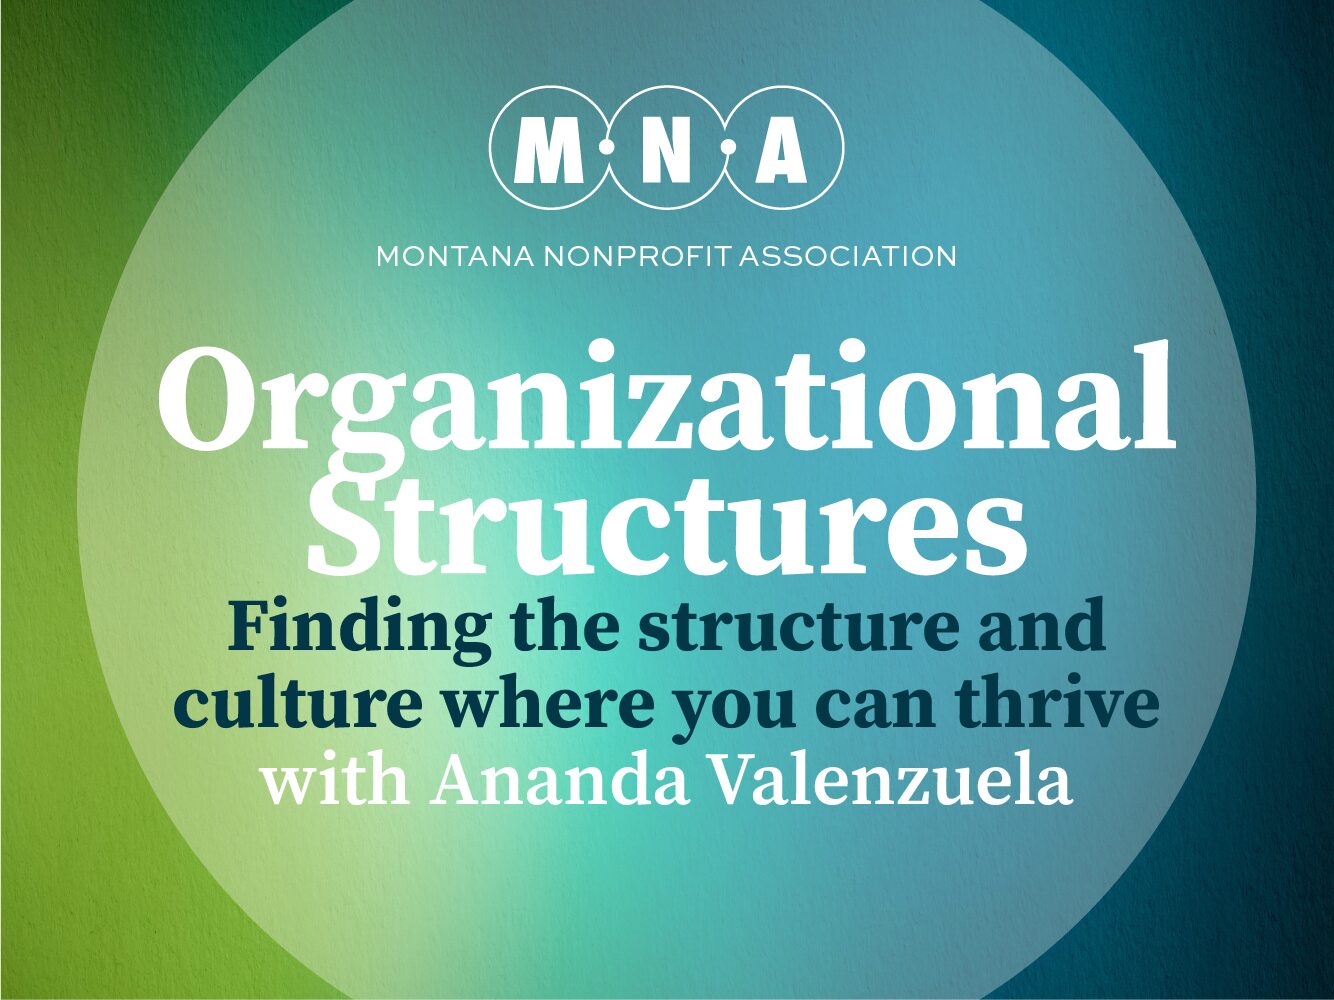 Organizational Structures - Finding the Structures and Culture Where You Can Thrive.